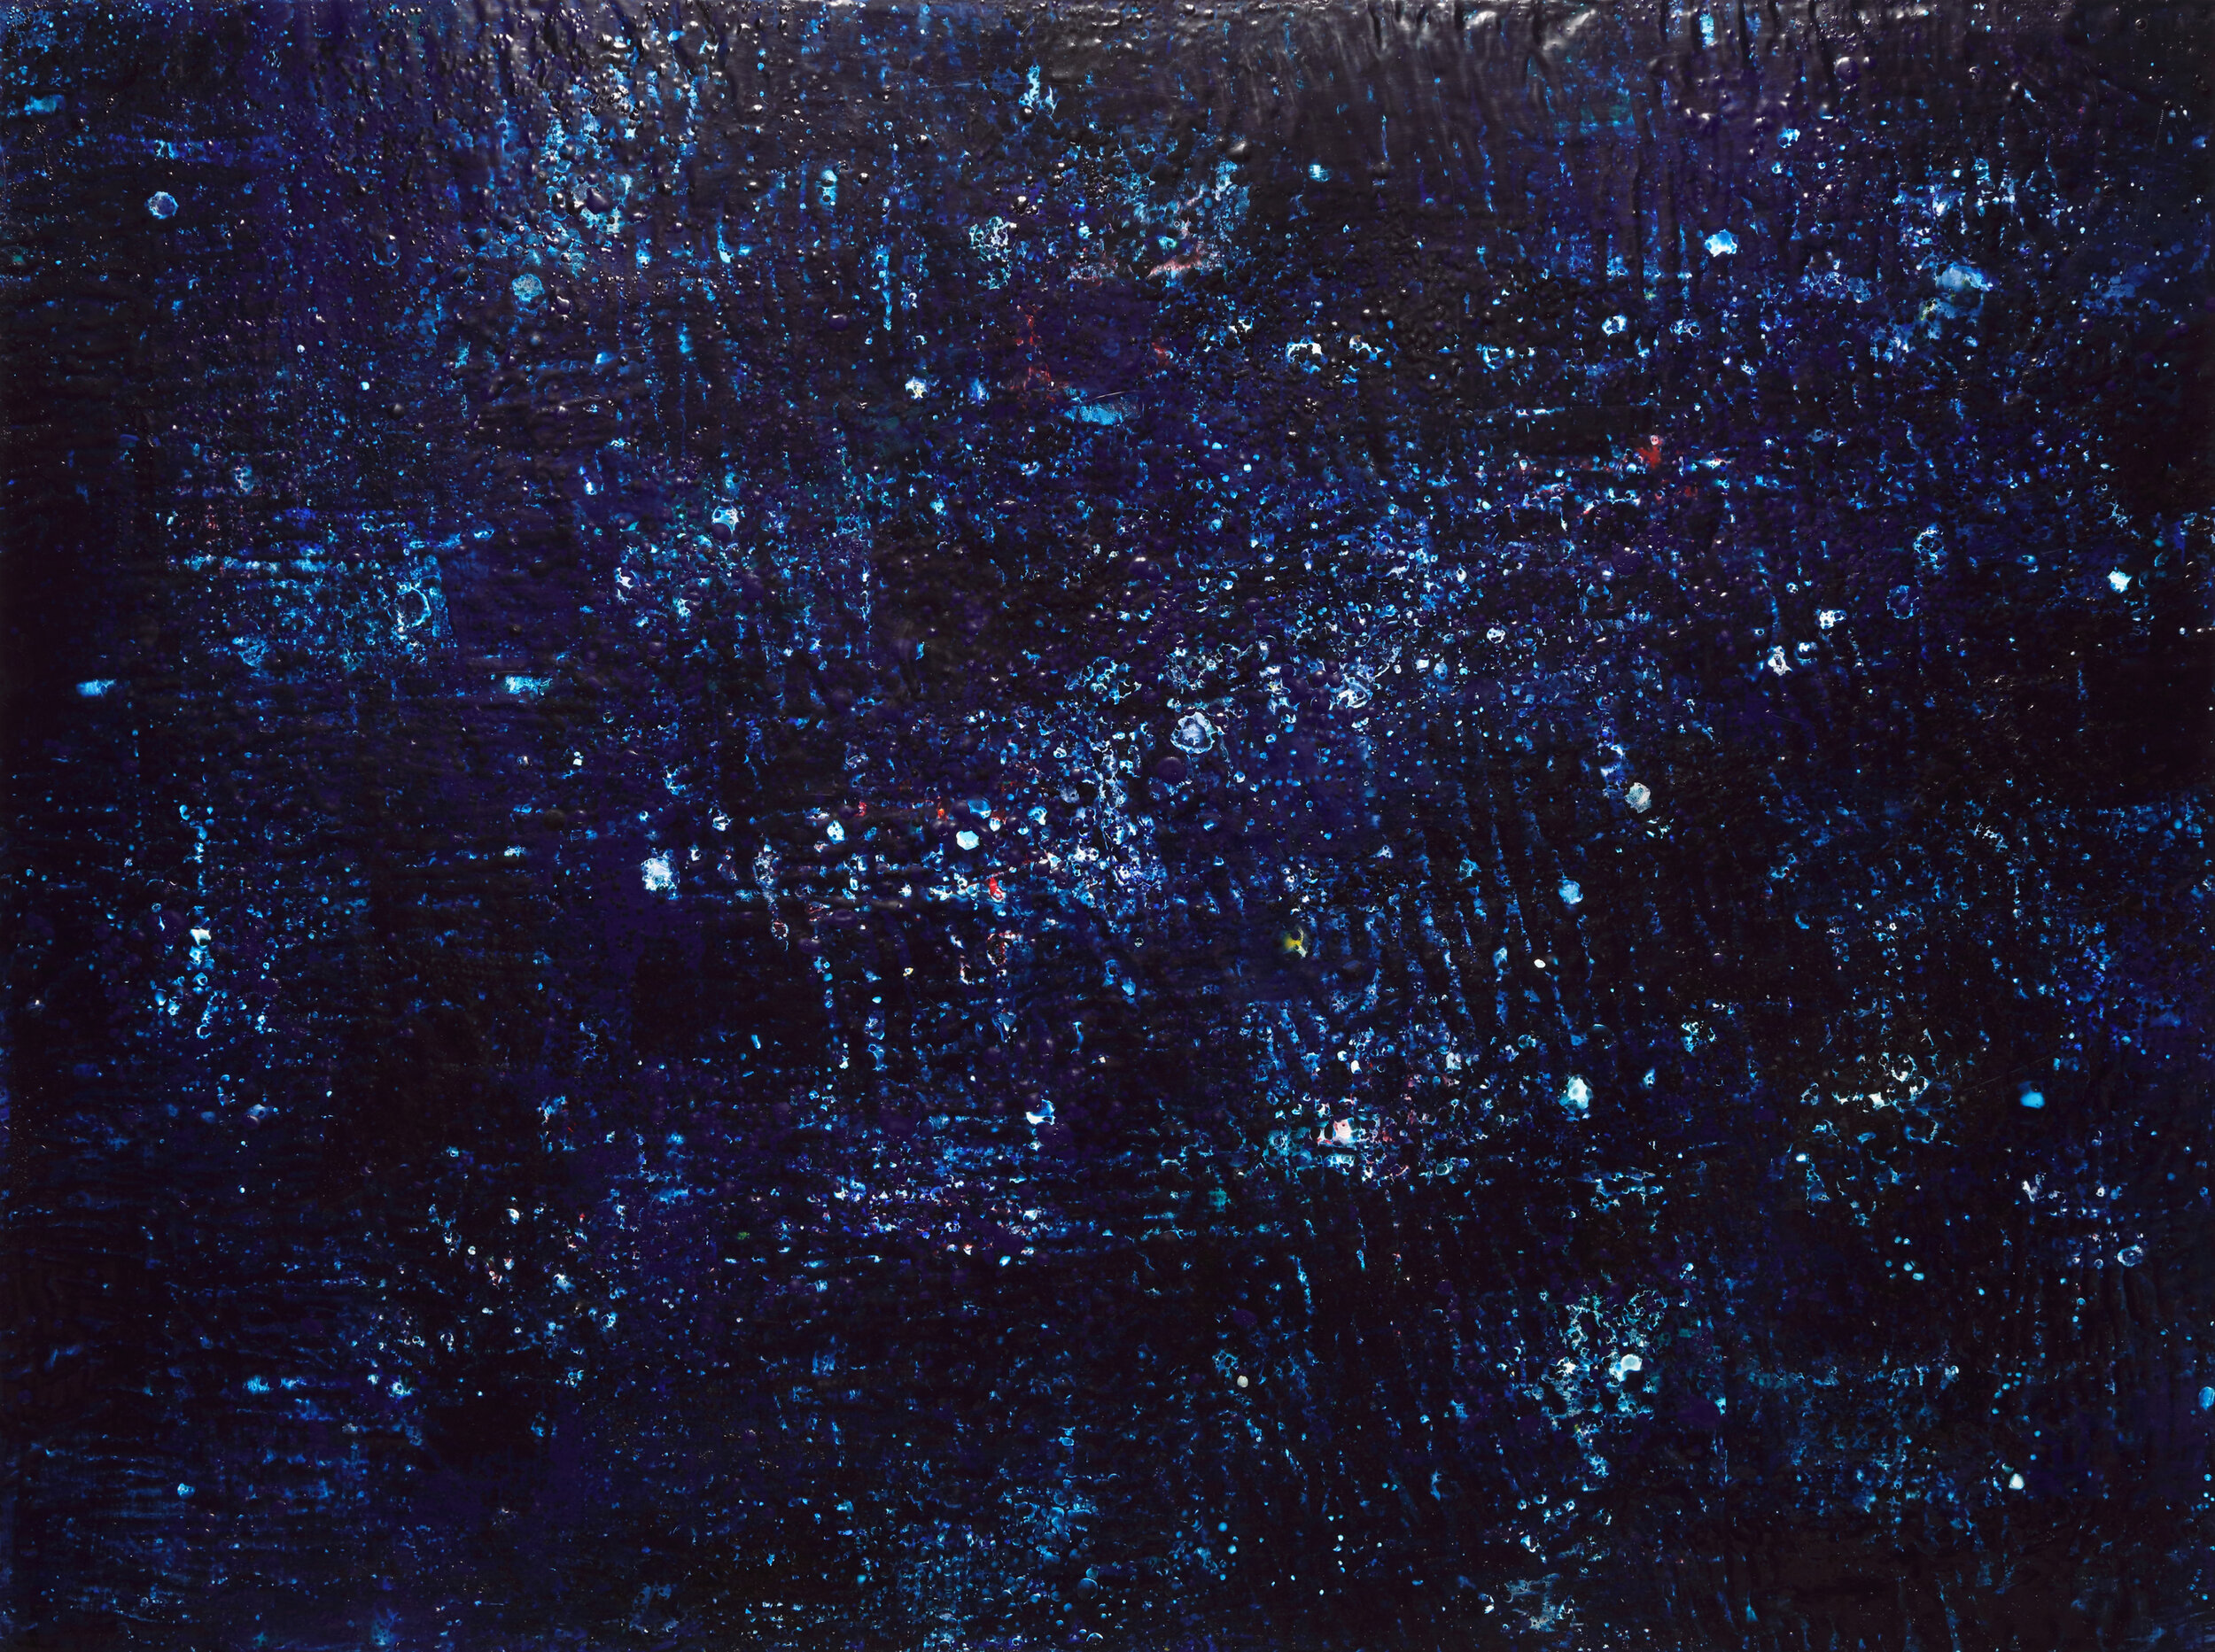  Michele Schuff   Dream, Stars (m-13)  , 2018 Encaustic on panel 31 x 41 x 2 in. YIMBY price $3,375  SOLD  